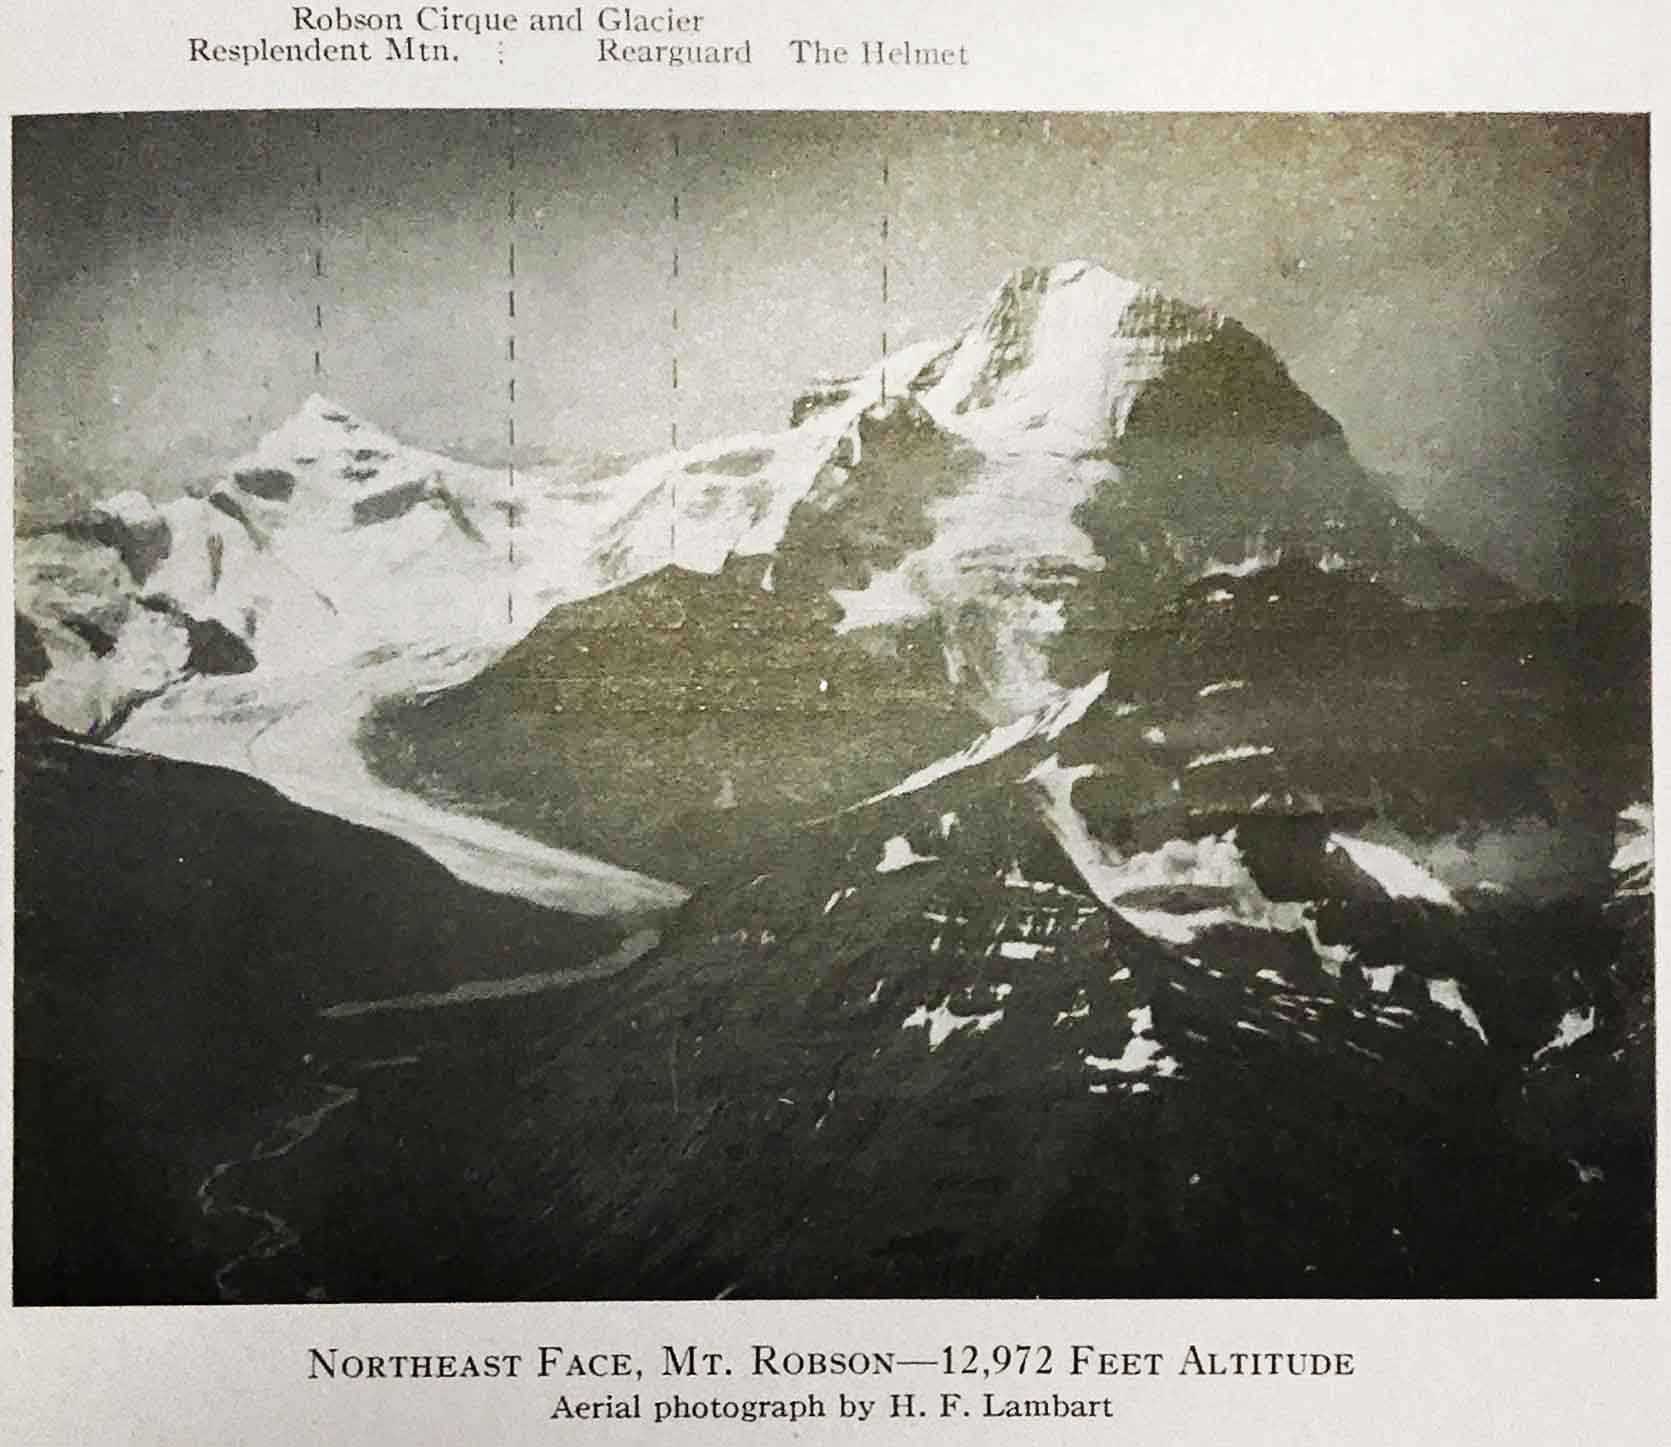 Northeast Face, Mt. Robson-12,972 feet altitude. Aerial photograph by H. F. Lambart, 1922